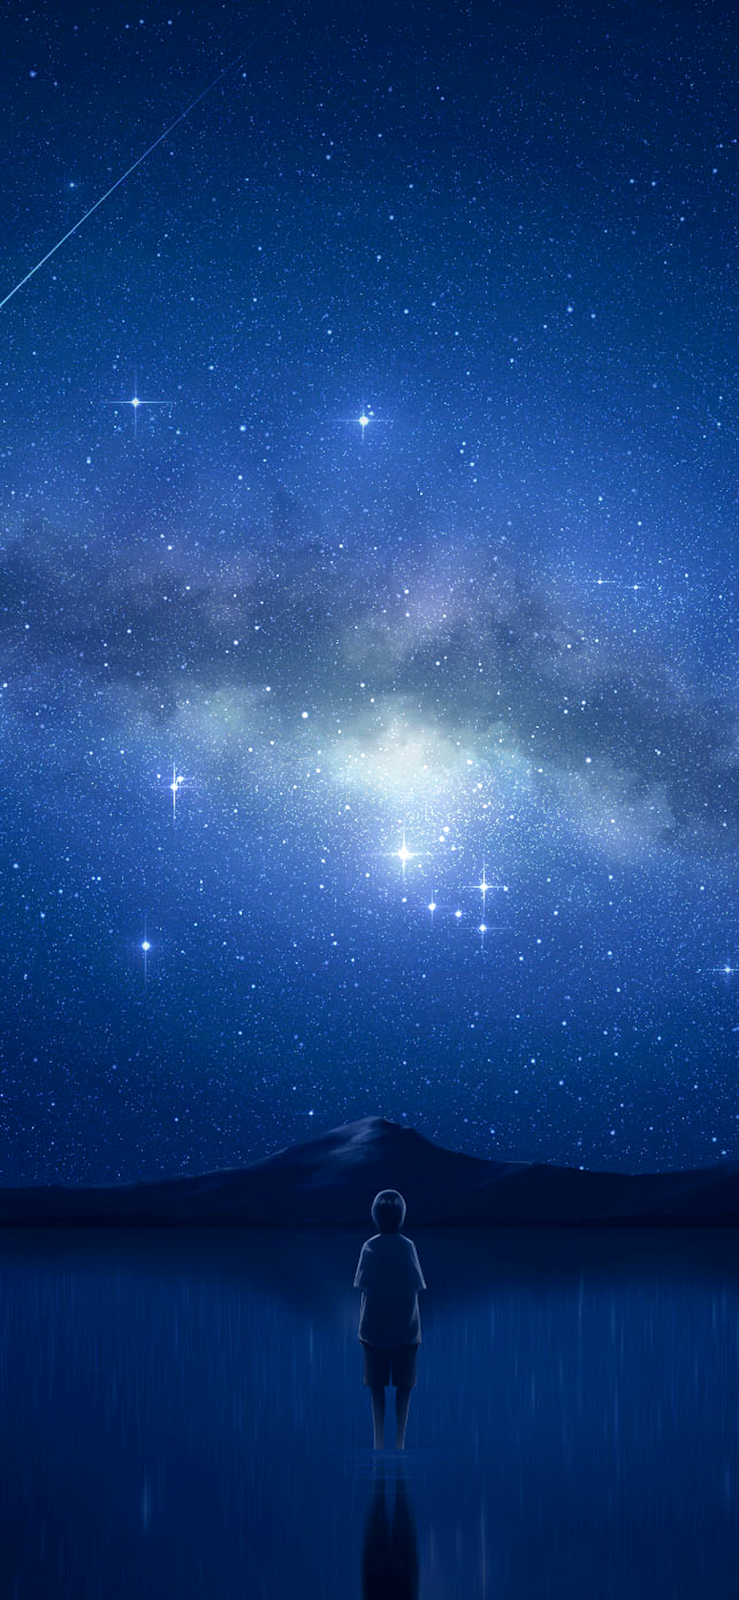 Under the starry night wallpaper for iPhone 11 Pro Max / iPhone XSMAX